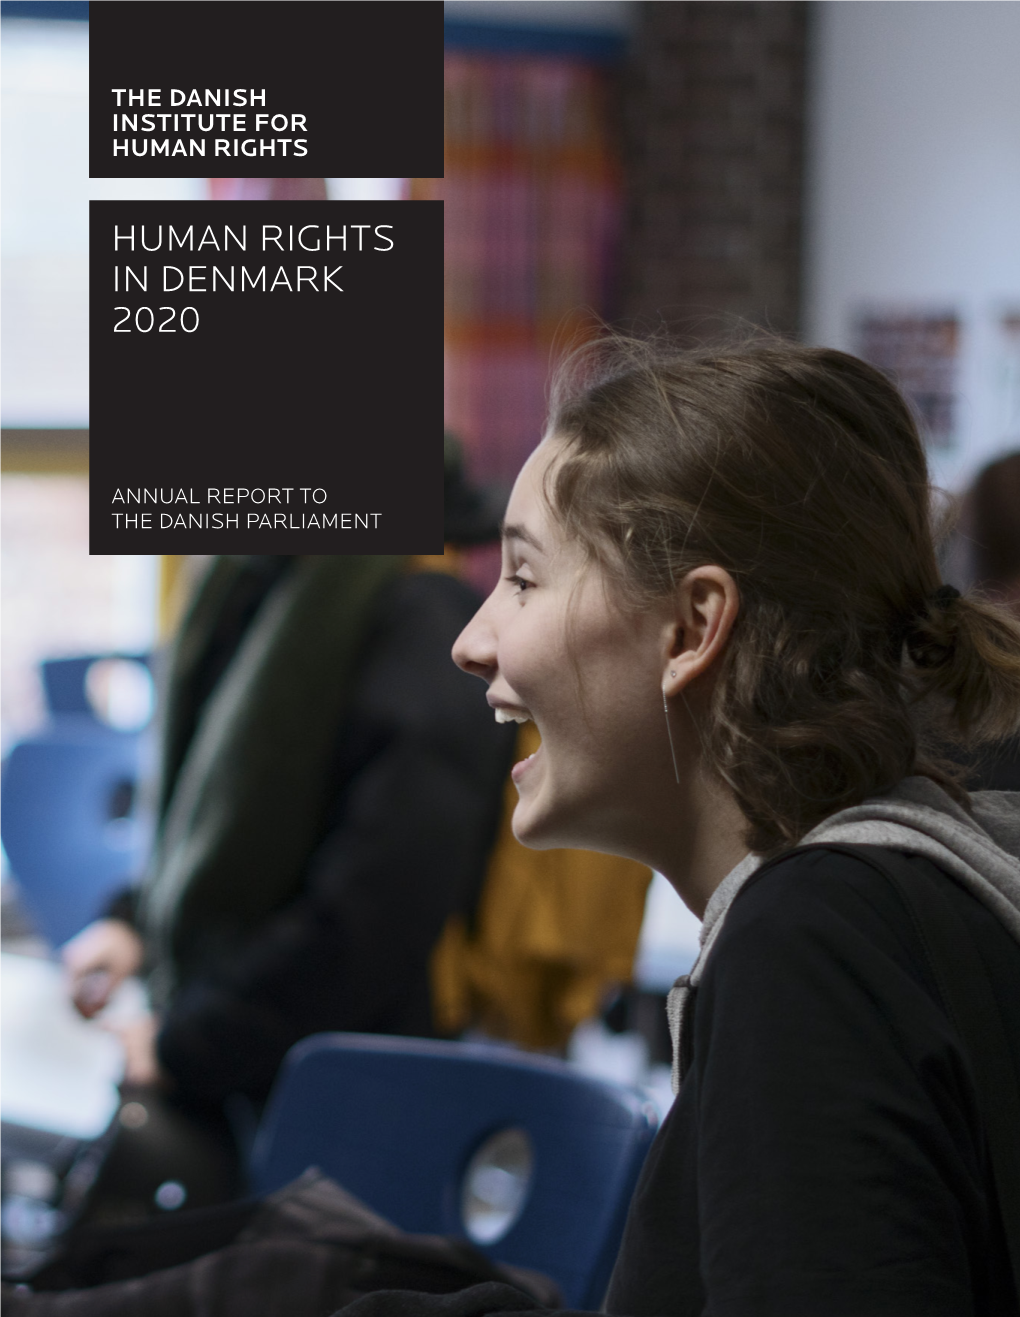 Human Rights in Denmark 2020 Annual Report to the Danish Parliament